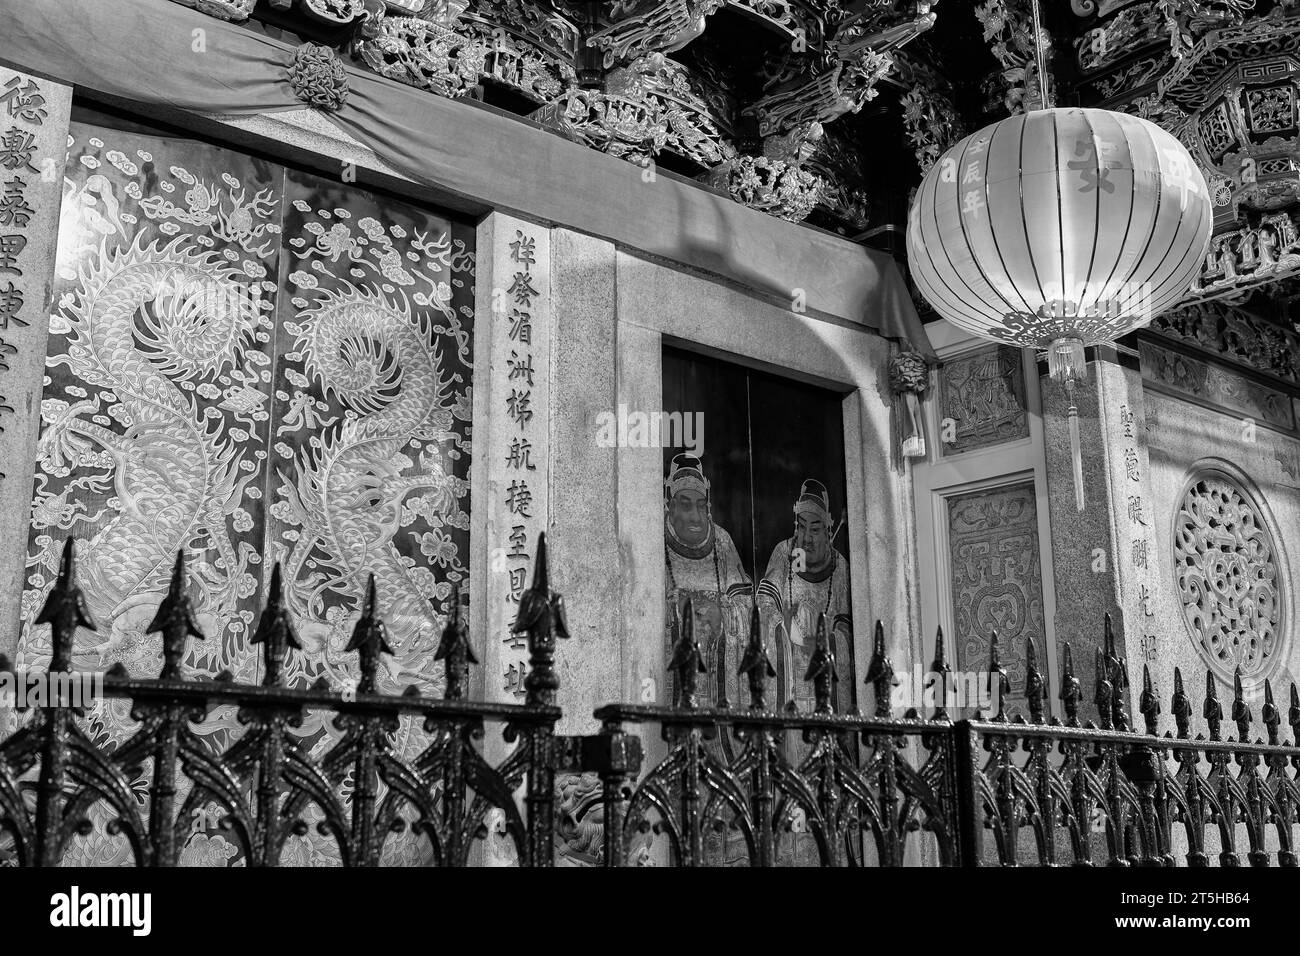 Black And White Photo Of The Entrance To The Thian Hock Keng Temple After Dark, Telok Ayer Street, Singapore. Stock Photo